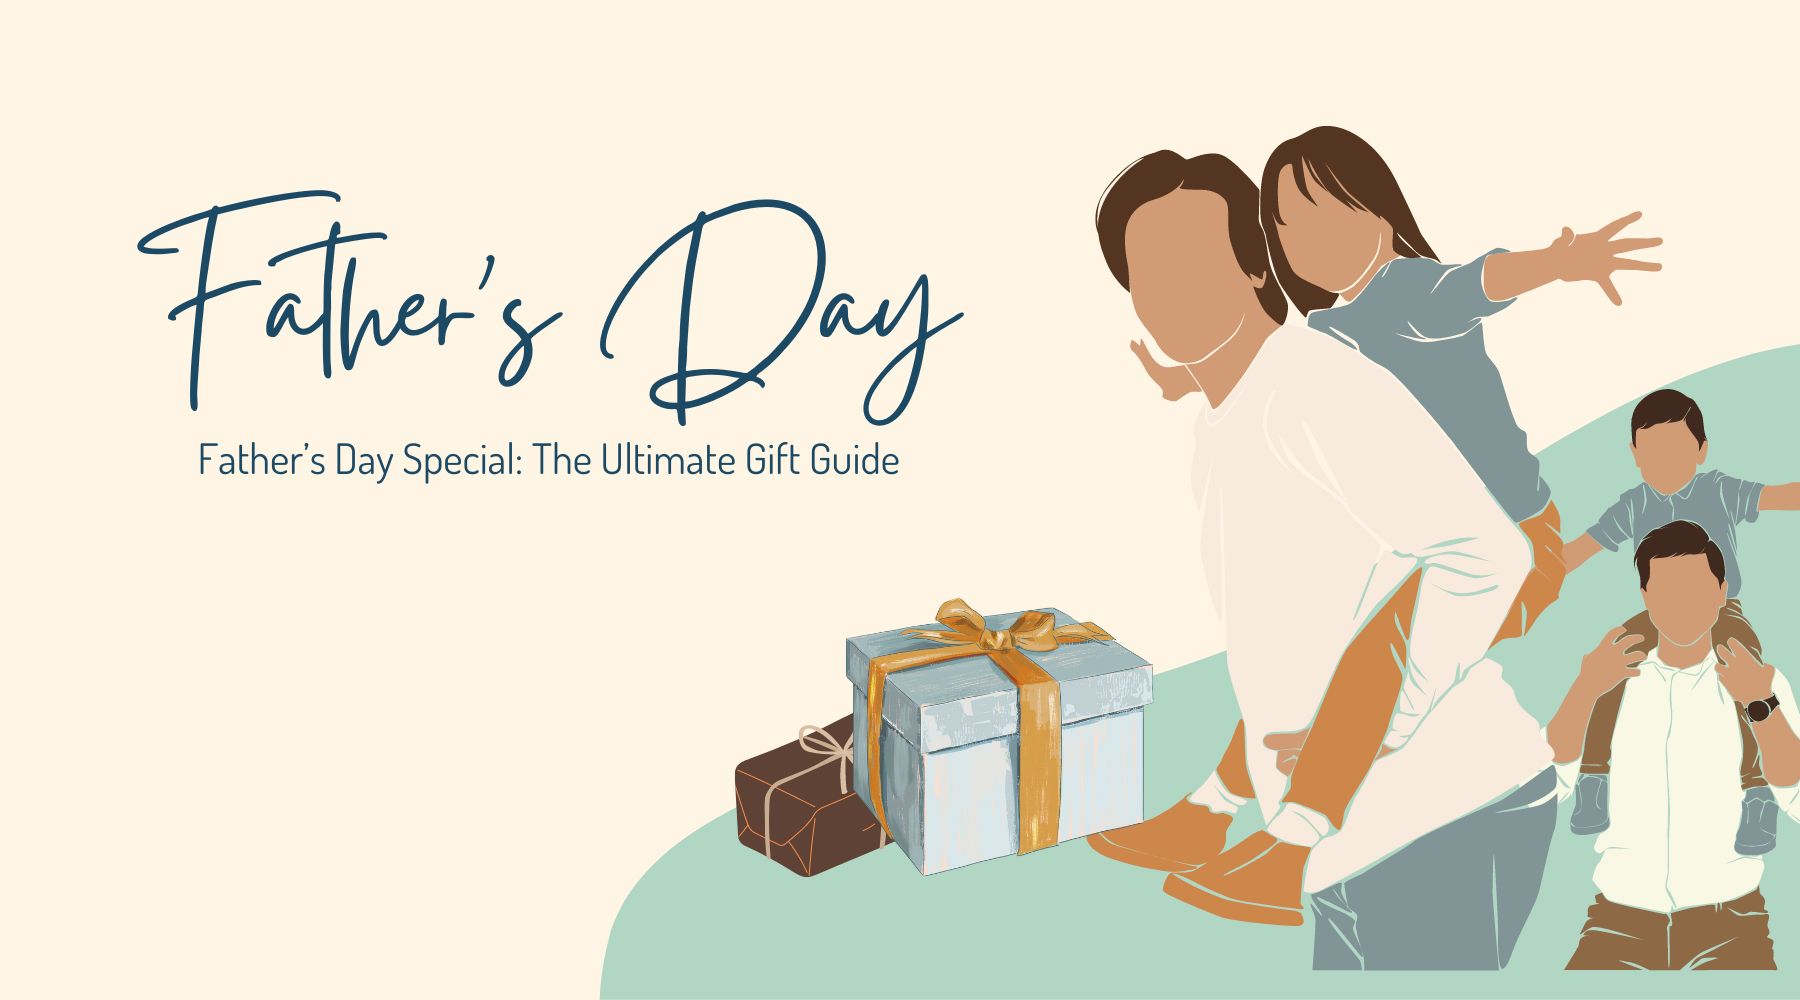 Father’s Day Special: The Ultimate Gift Guide